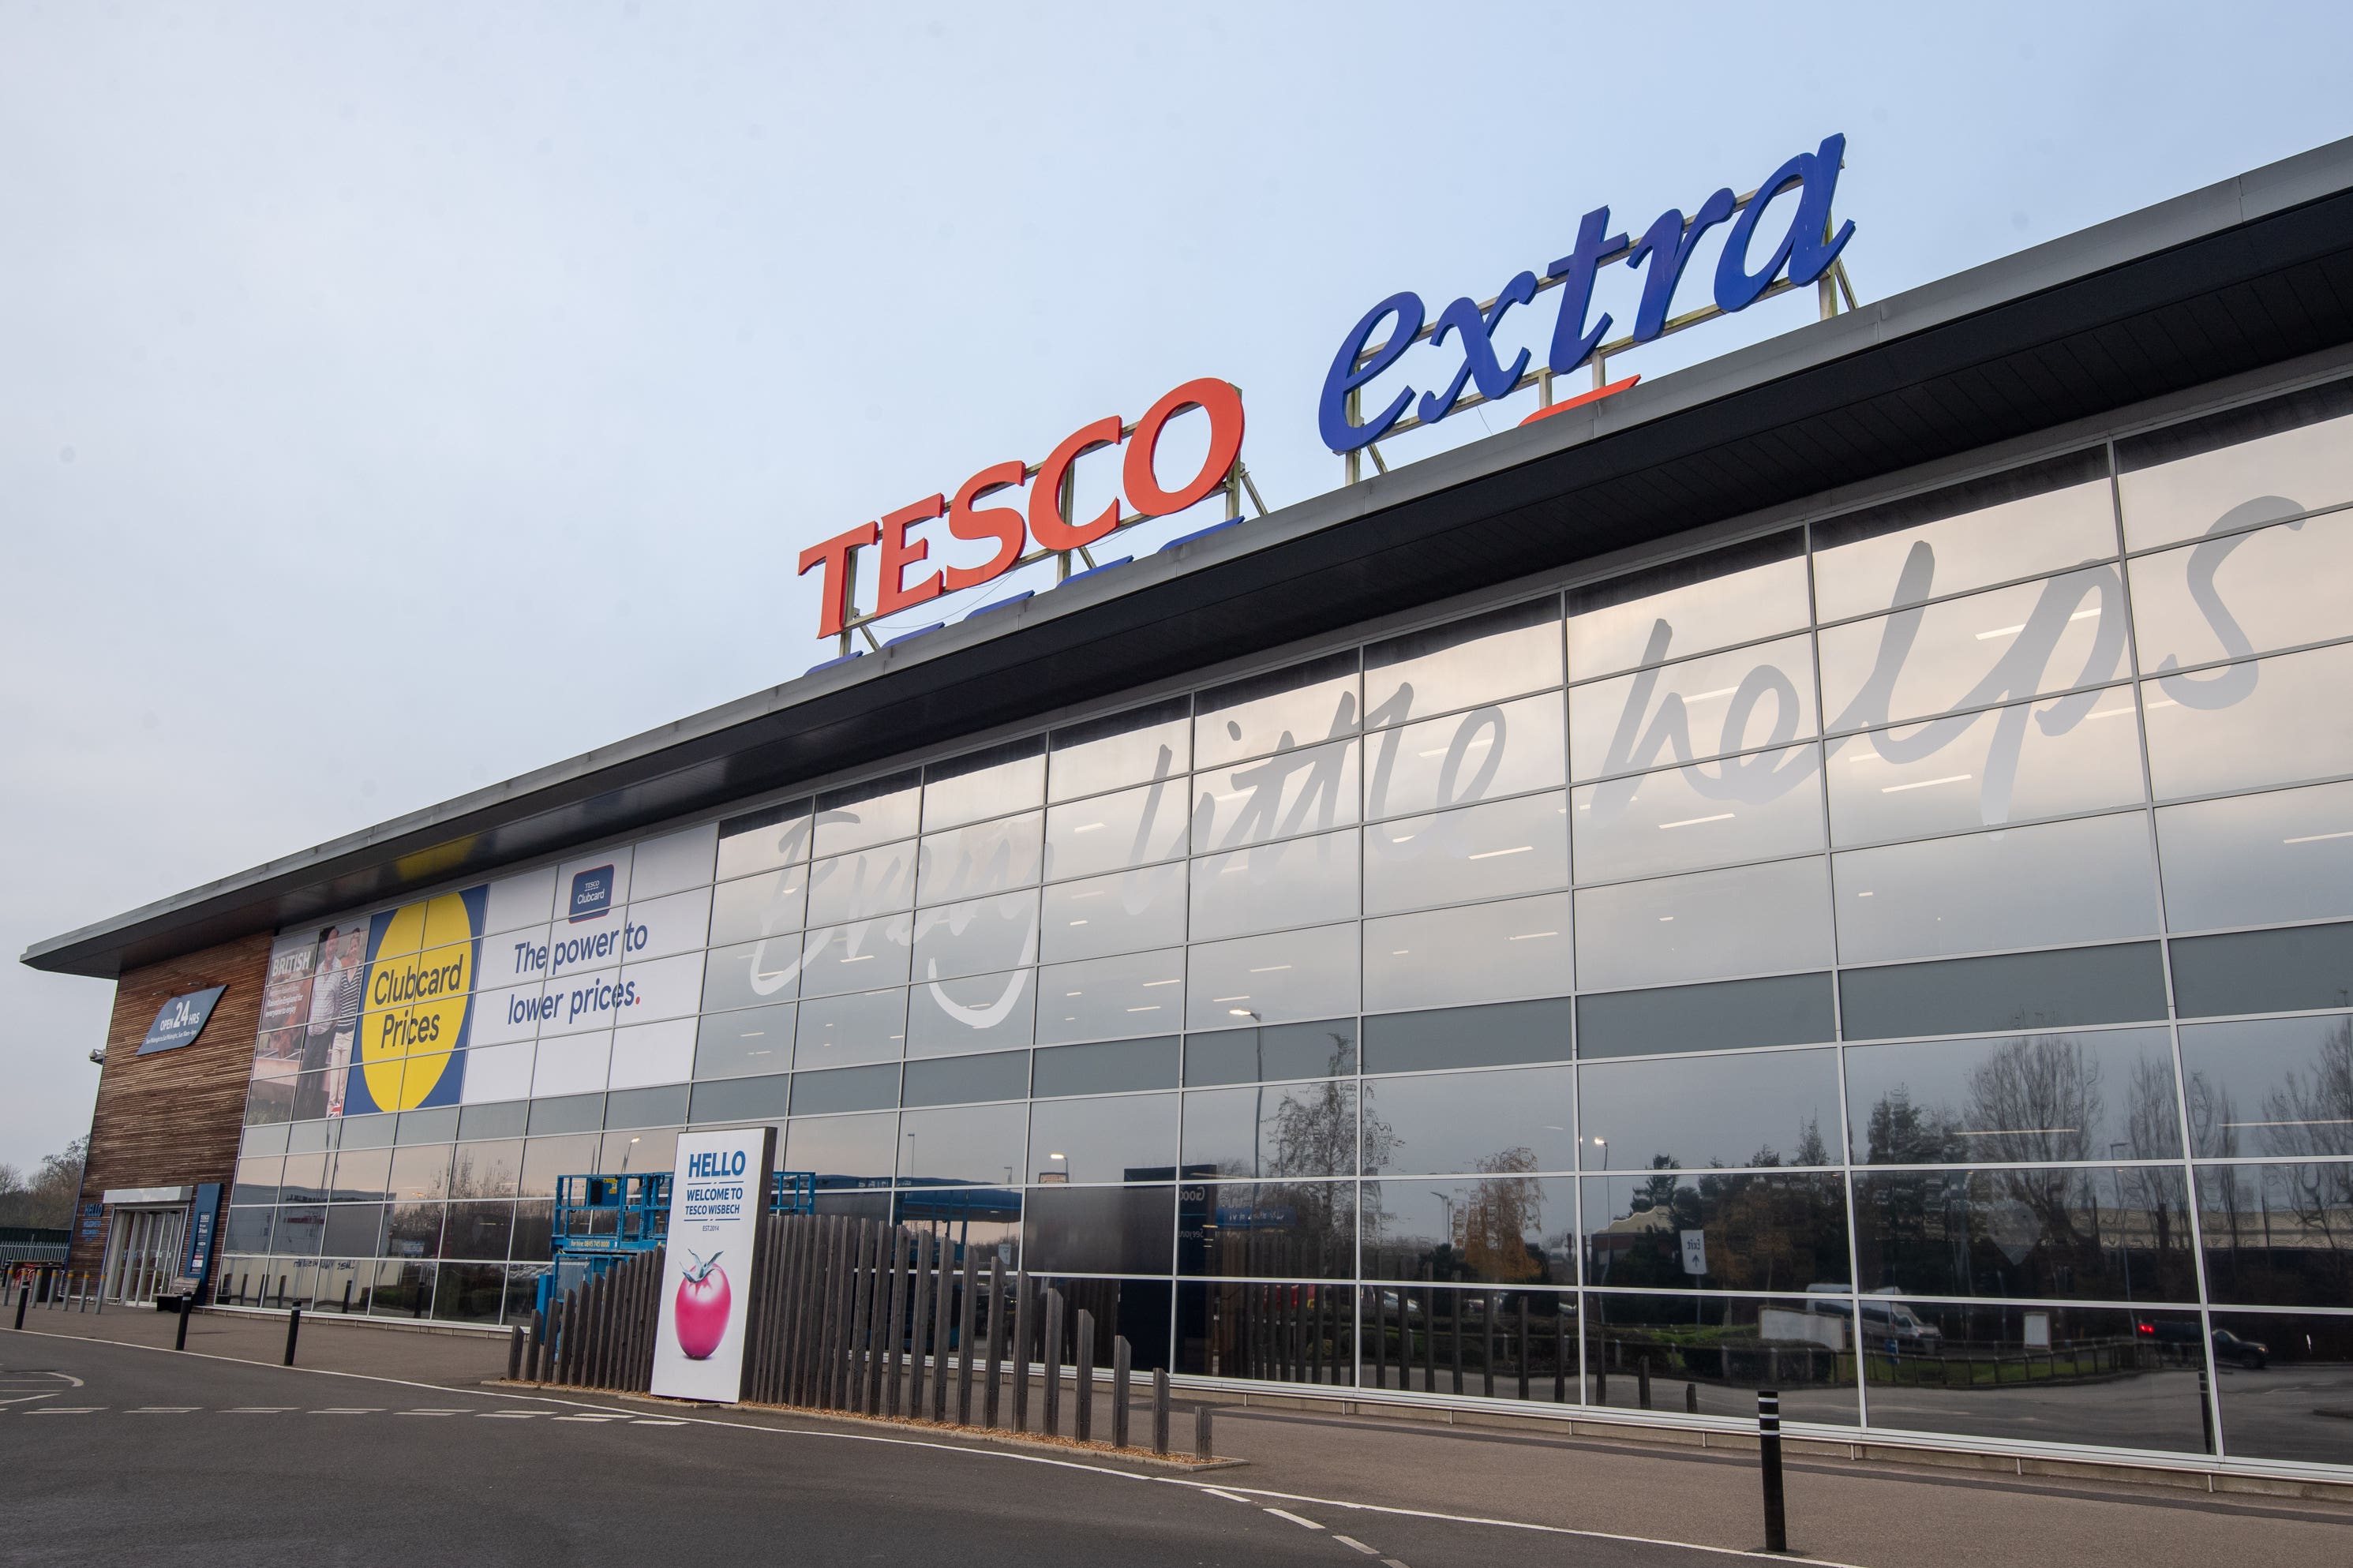 Some 20,000 Tesco staffers shared a little extra from the group’s optional share saving scheme